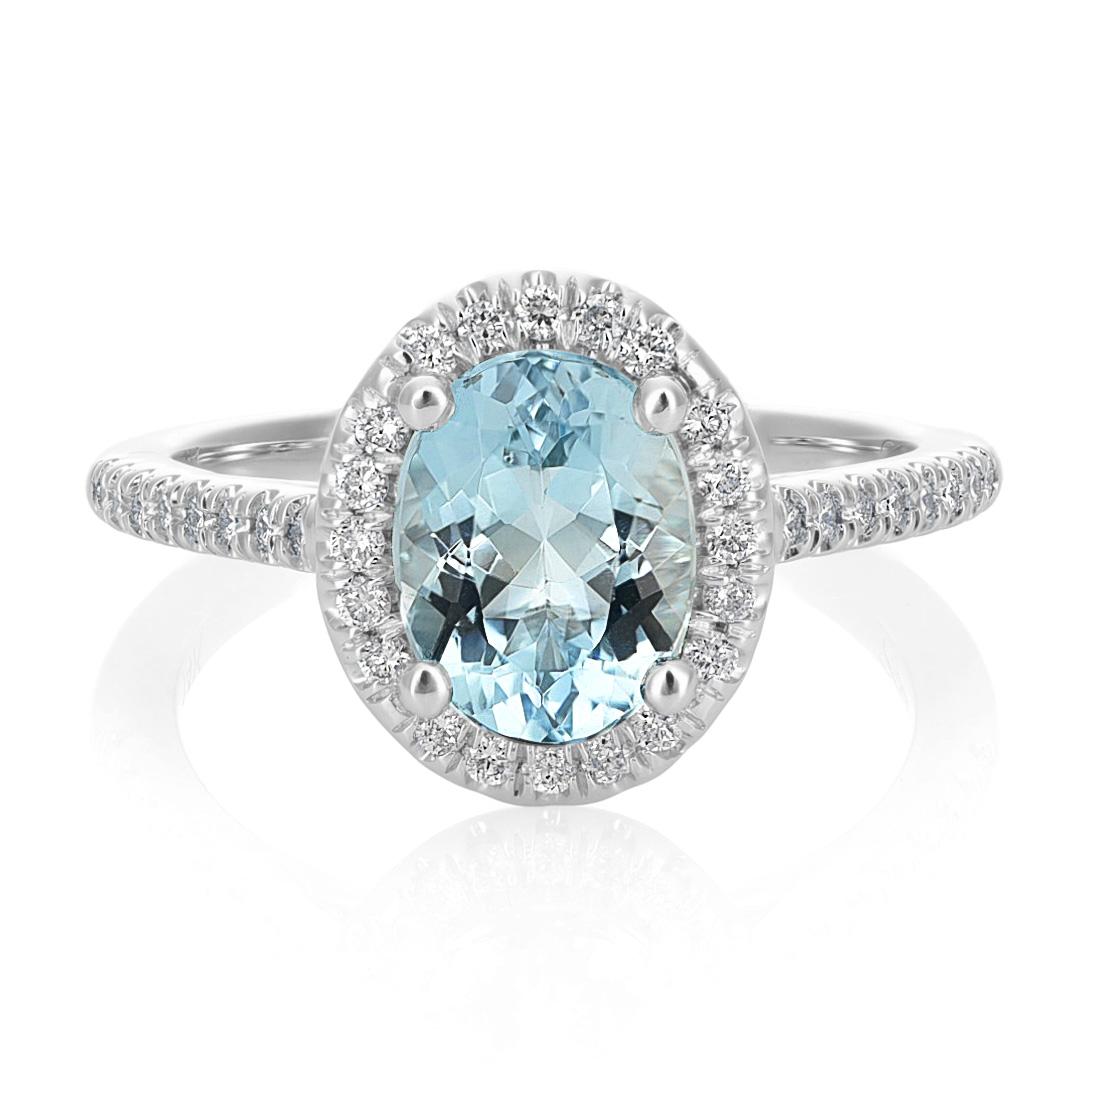 0.61 Carats Natural Aquamarine Diamonds set in 14K White Gold In New Condition For Sale In Los Angeles, CA